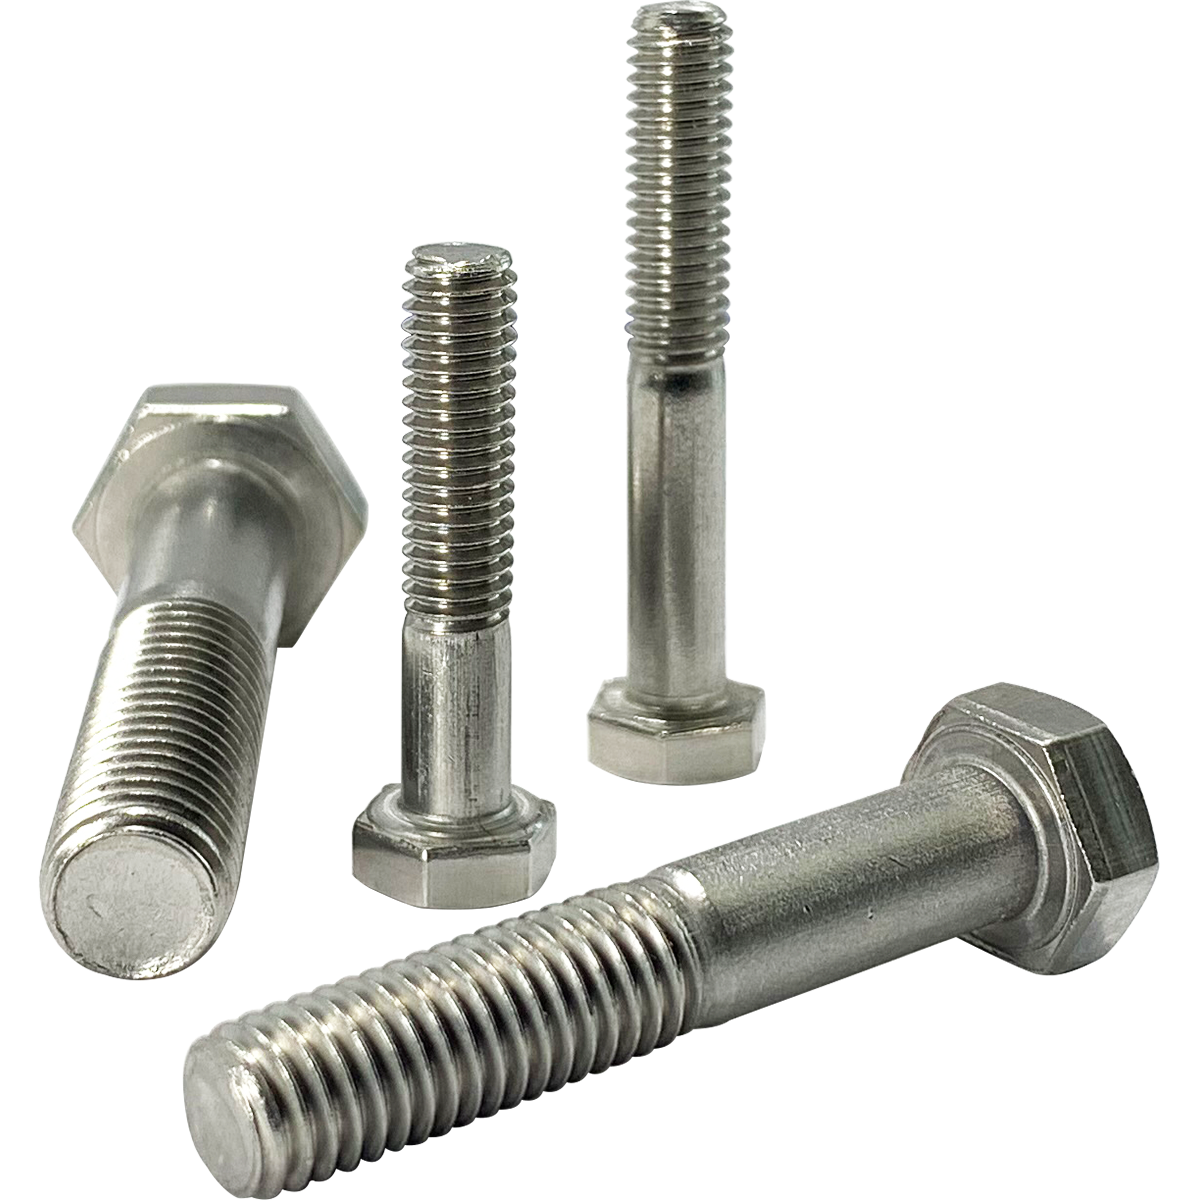 Part thread hexagon bolts, also known as hex bolts, available in various materials with metric, UNC and UNF threads, all at competitive prices with bulk discounts